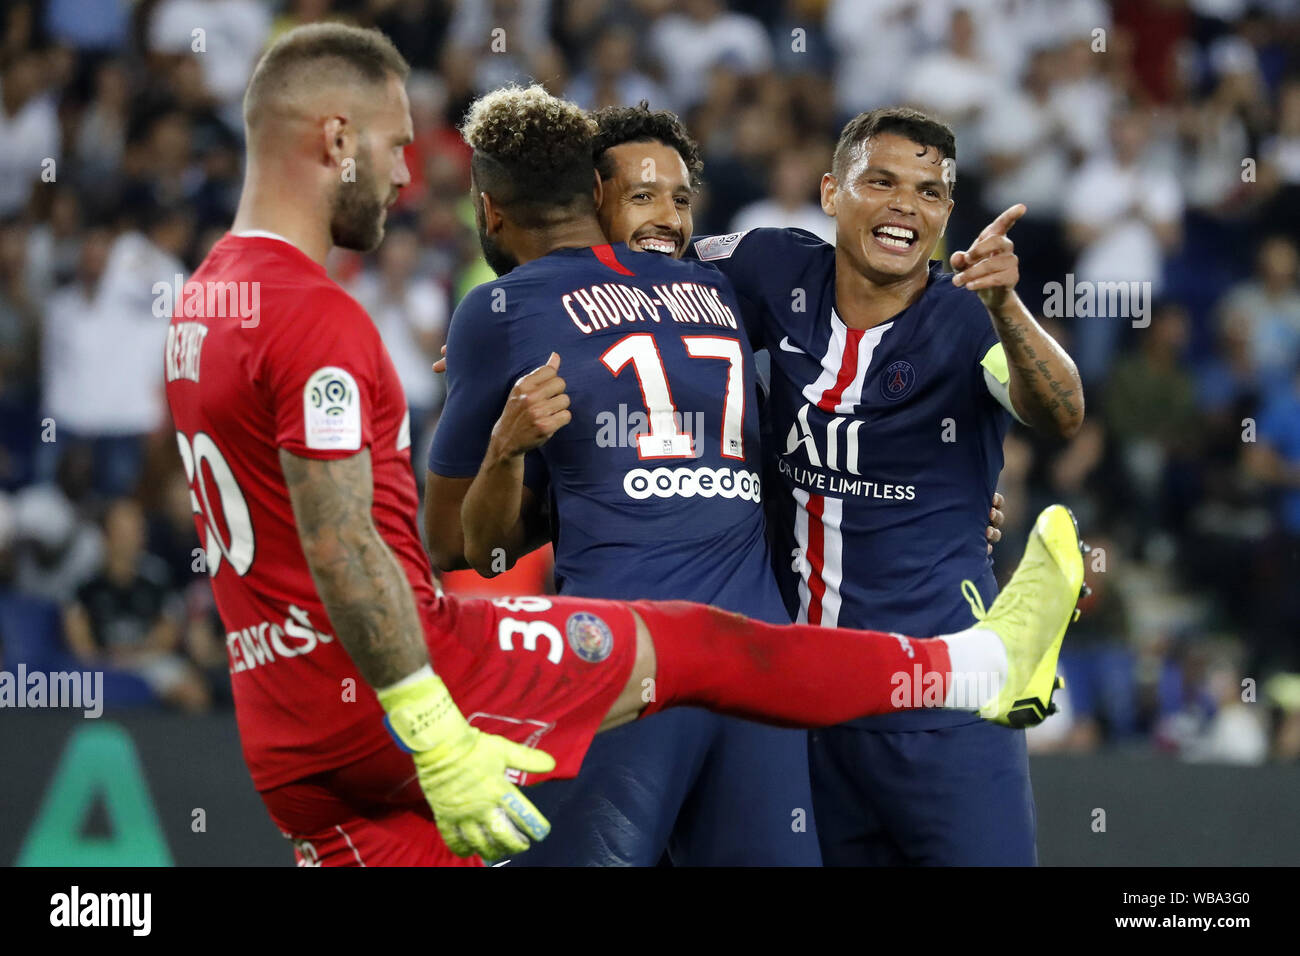 Paris, France. 25th Aug, 2019. Eric Choupo-Moting (2nd L) of Paris Saint-Germain celebrates his goal with teammates Marquinhos (2nd R) and Thiago Silva (1st R) during the Ligue 1 match between Paris Saint Germain and FC Toulouse at the Parc des Princes in Paris, France, on Aug. 25, 2019. Credit: Jack Chan/Xinhua Stock Photo